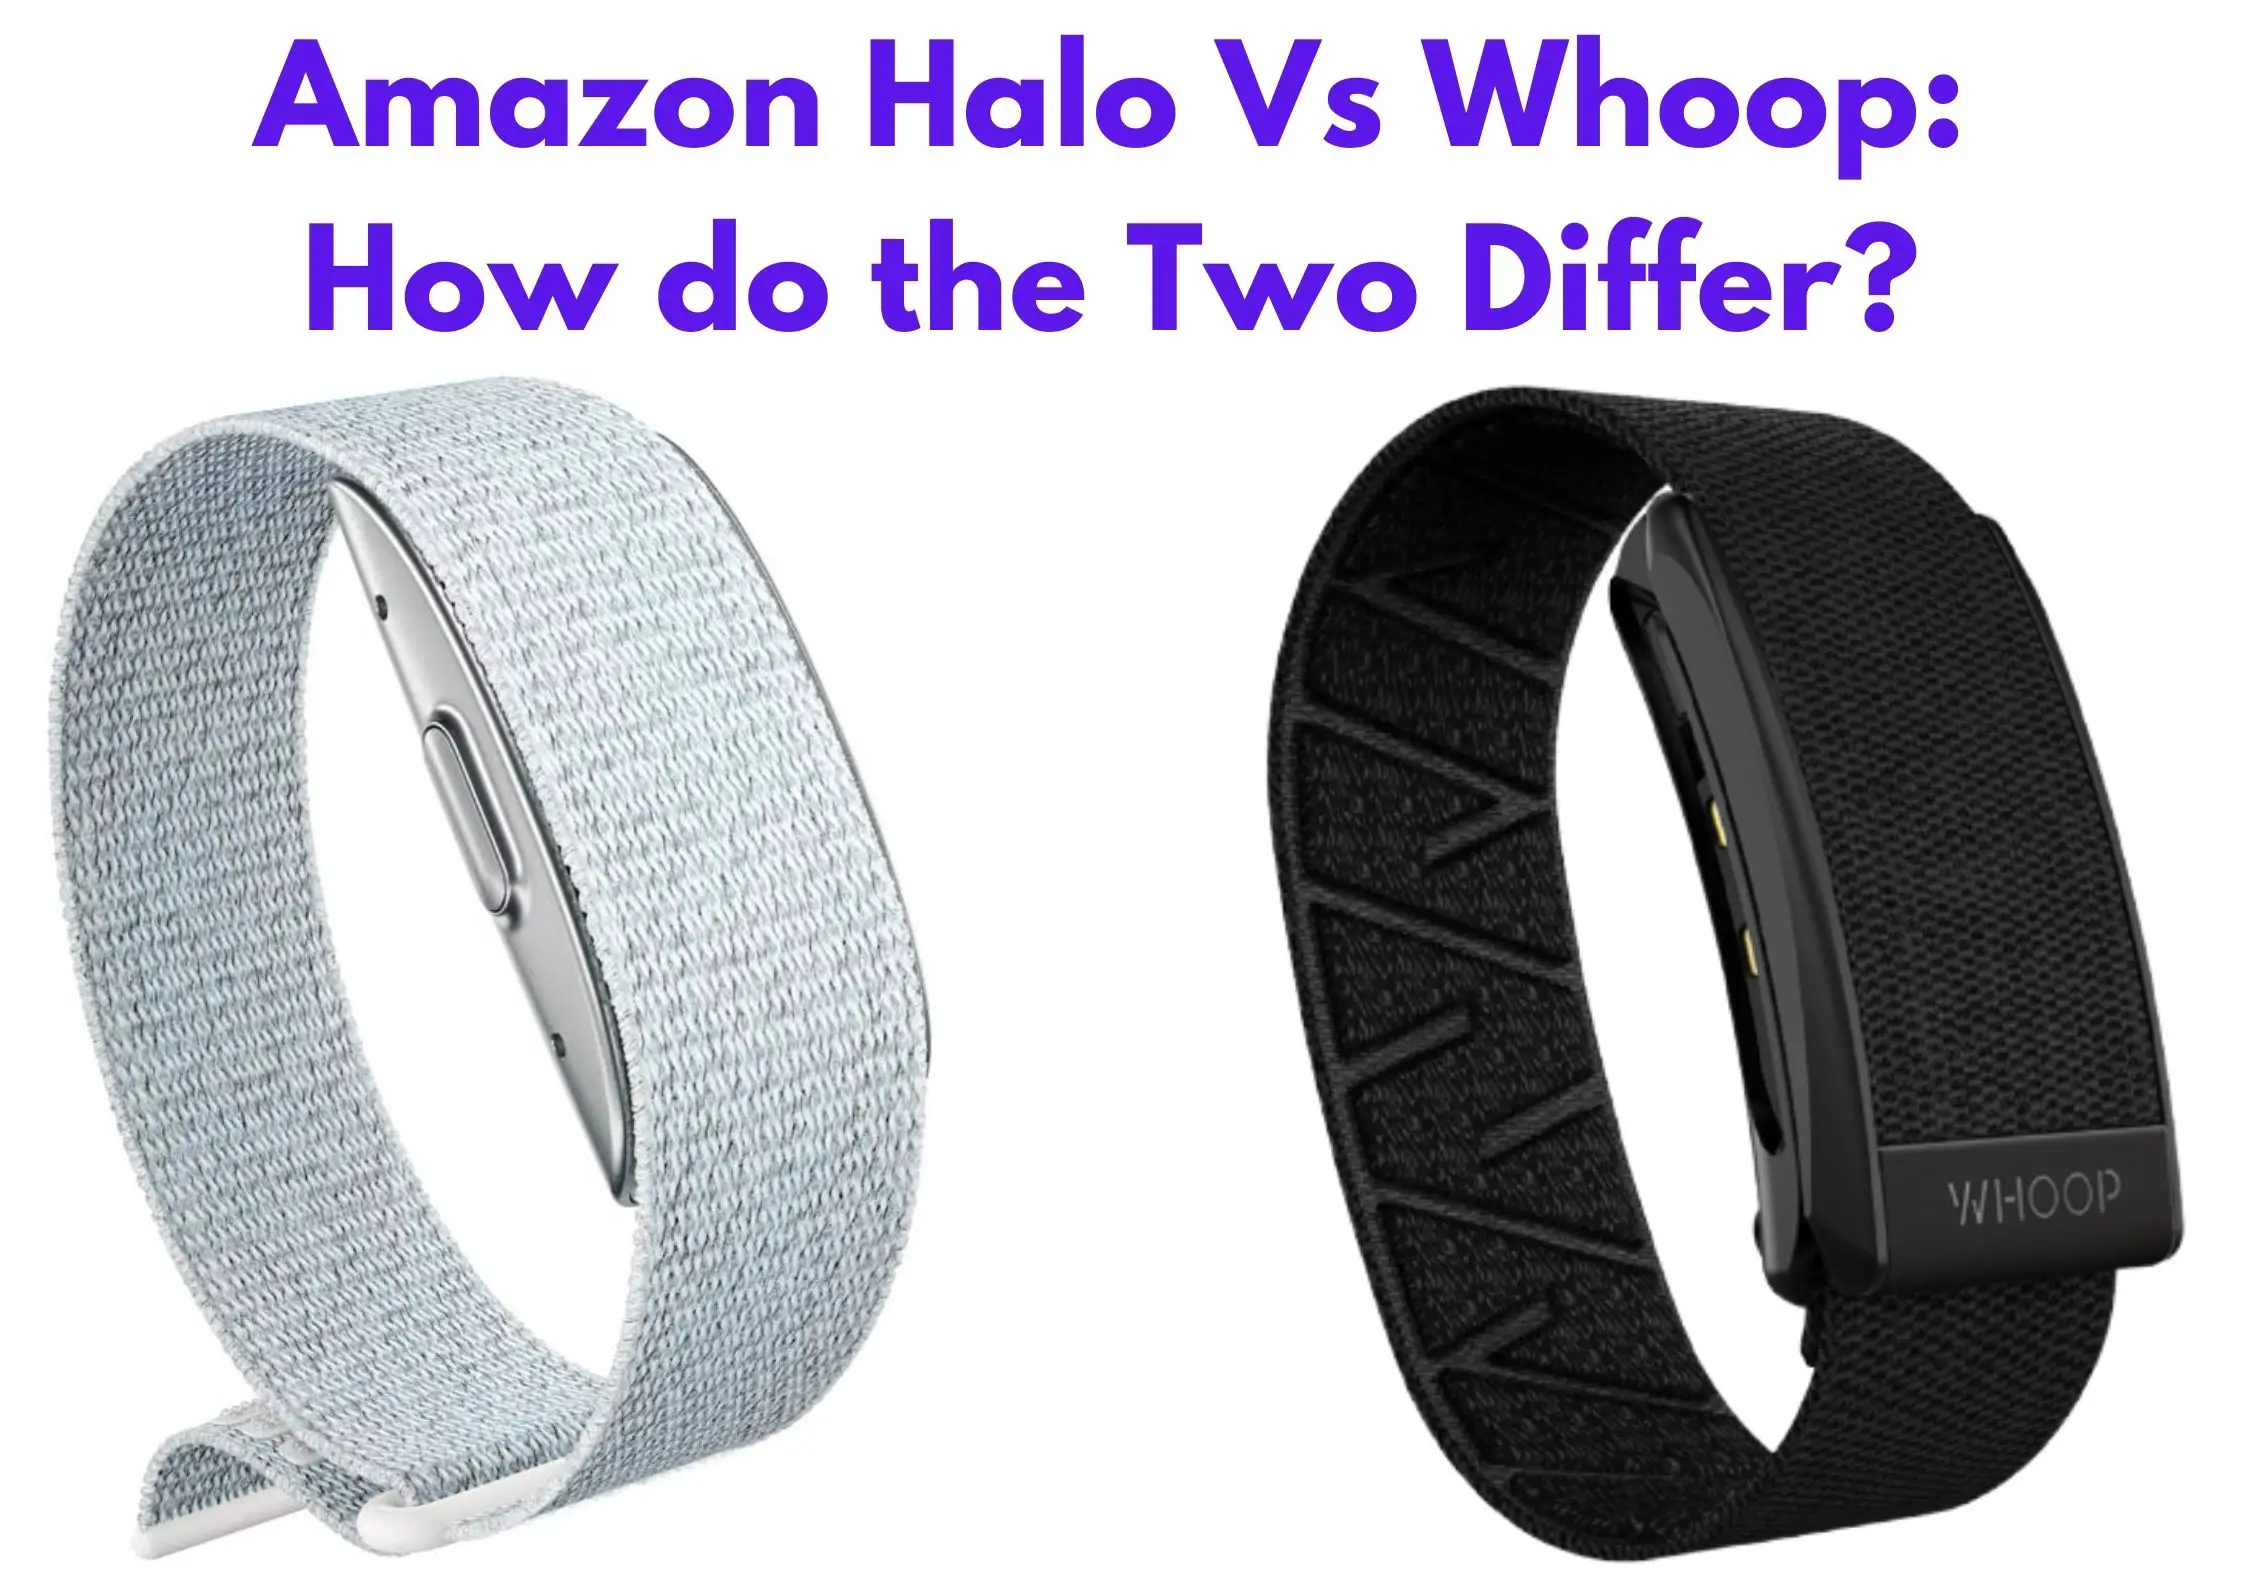 Amazon Halo Vs Whoop: How do the Two Differ?